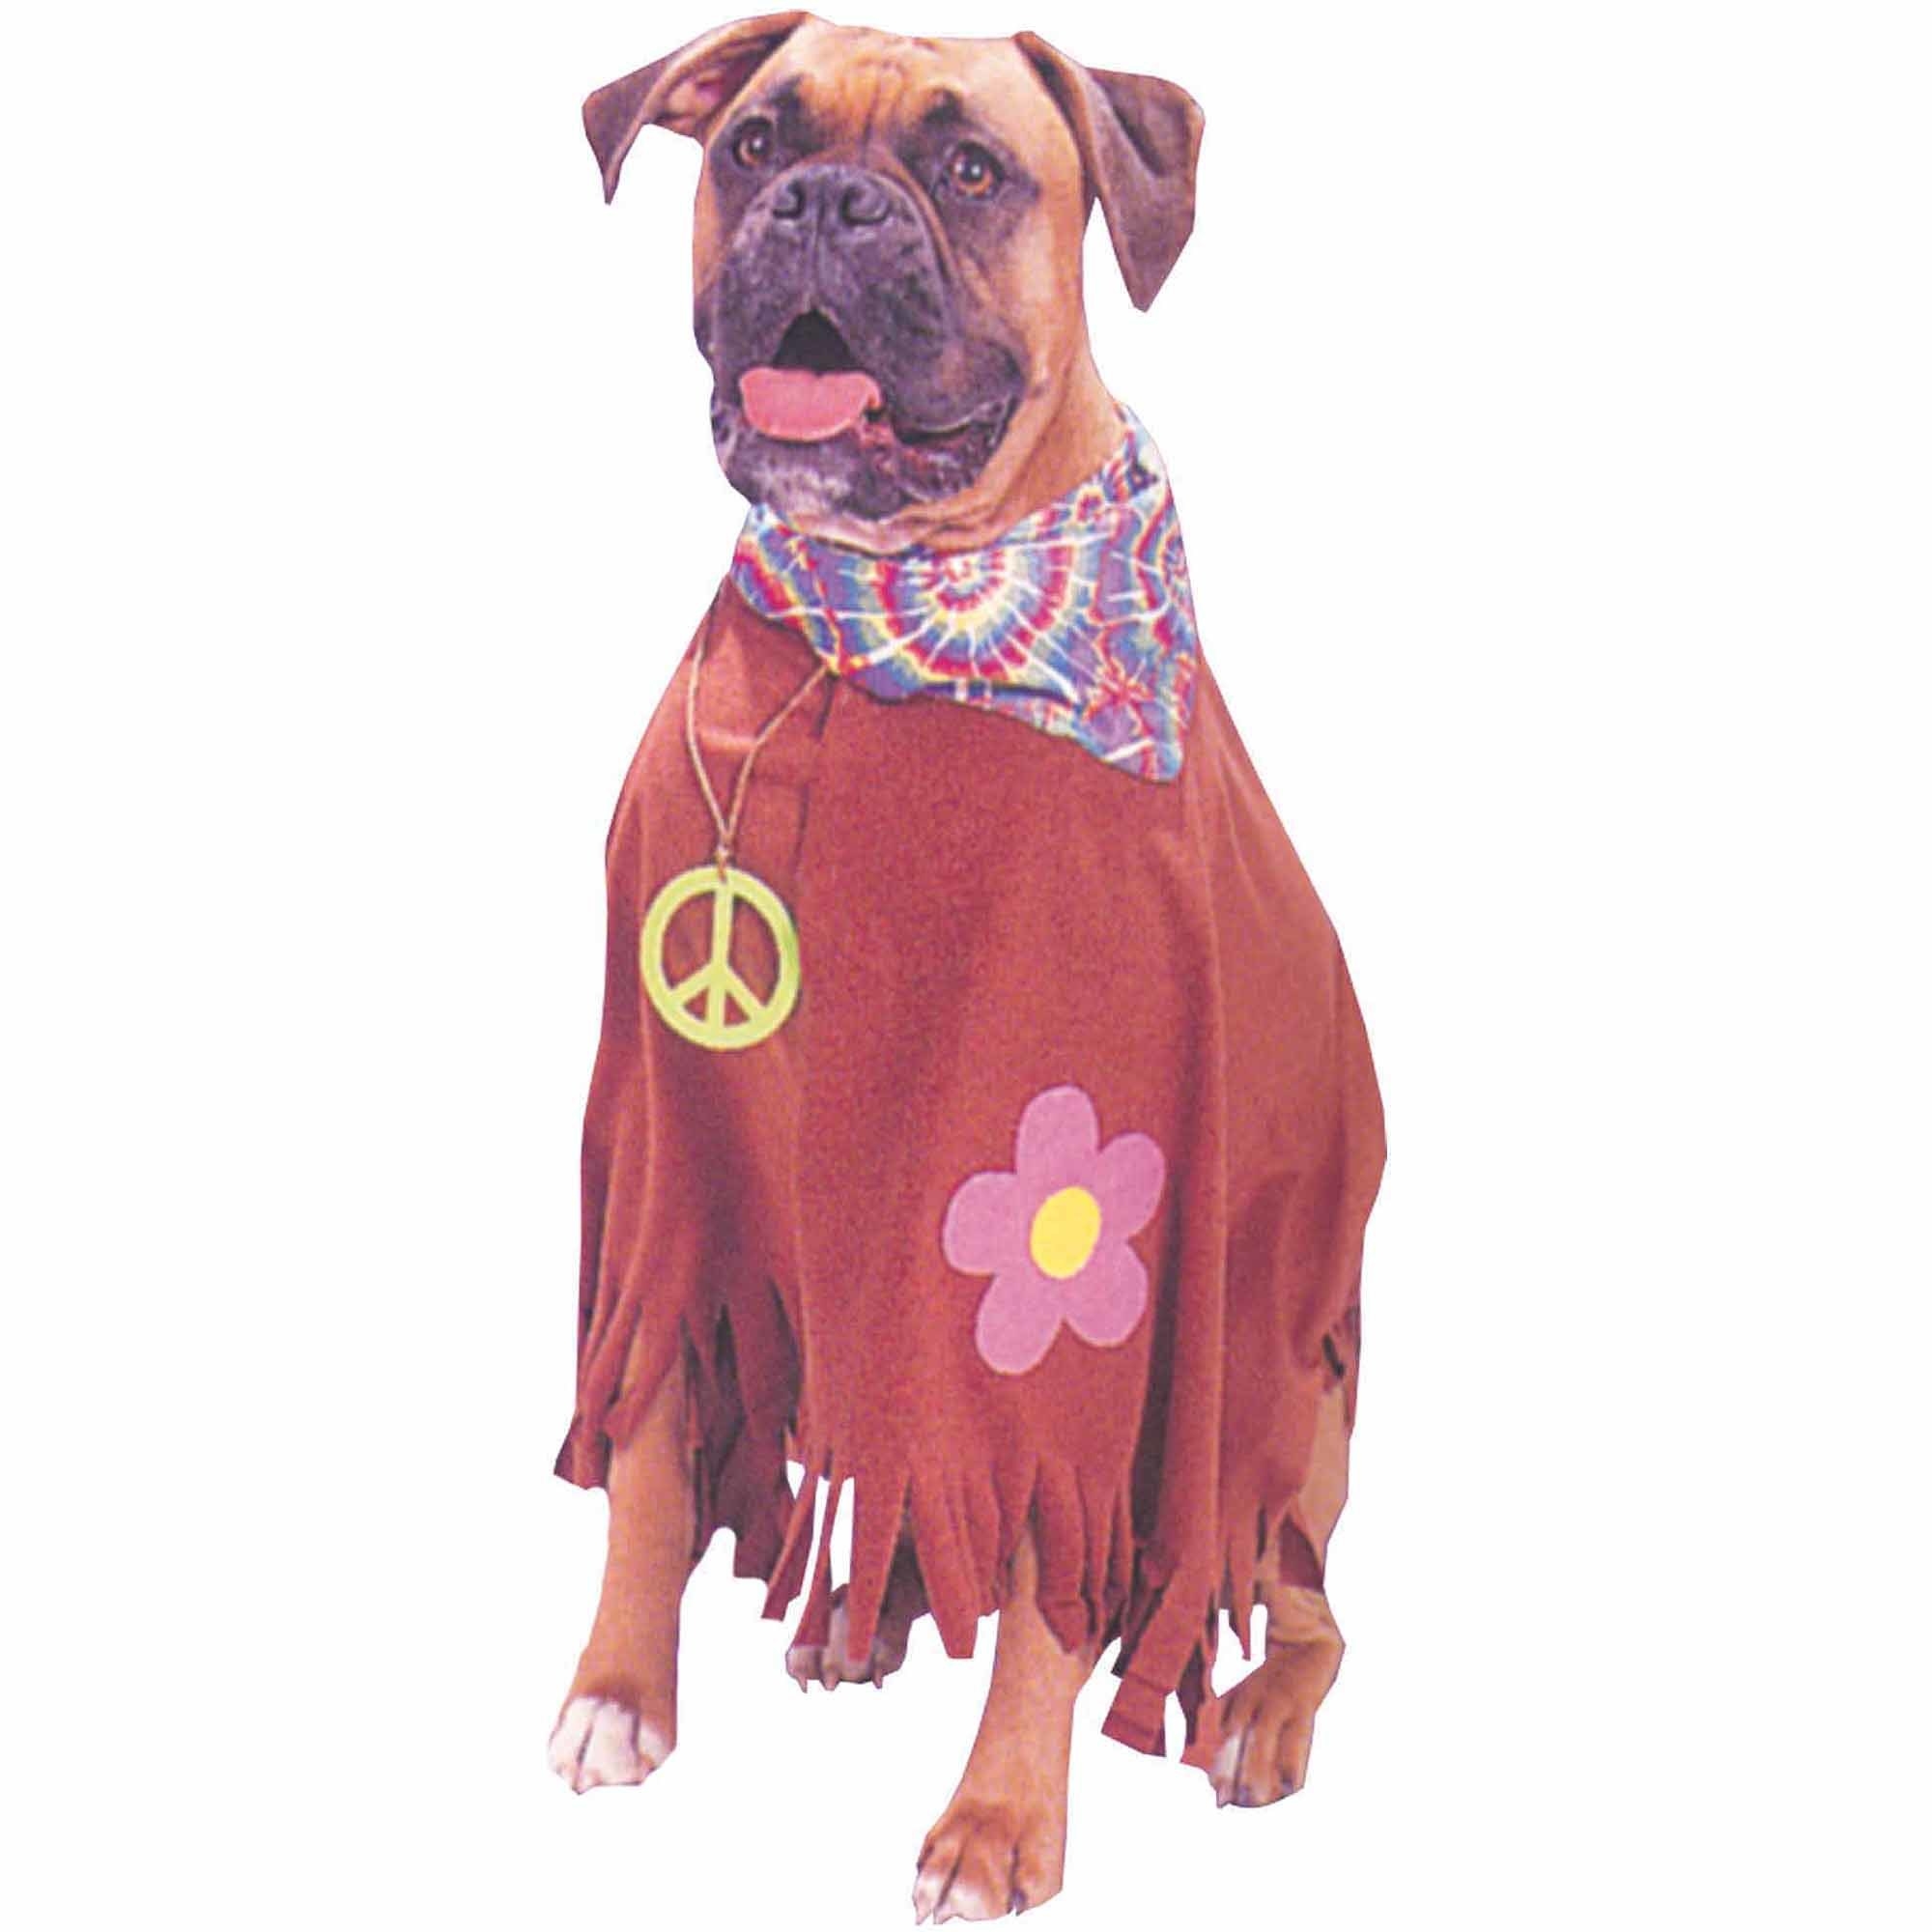 dog wearing the hippie costume